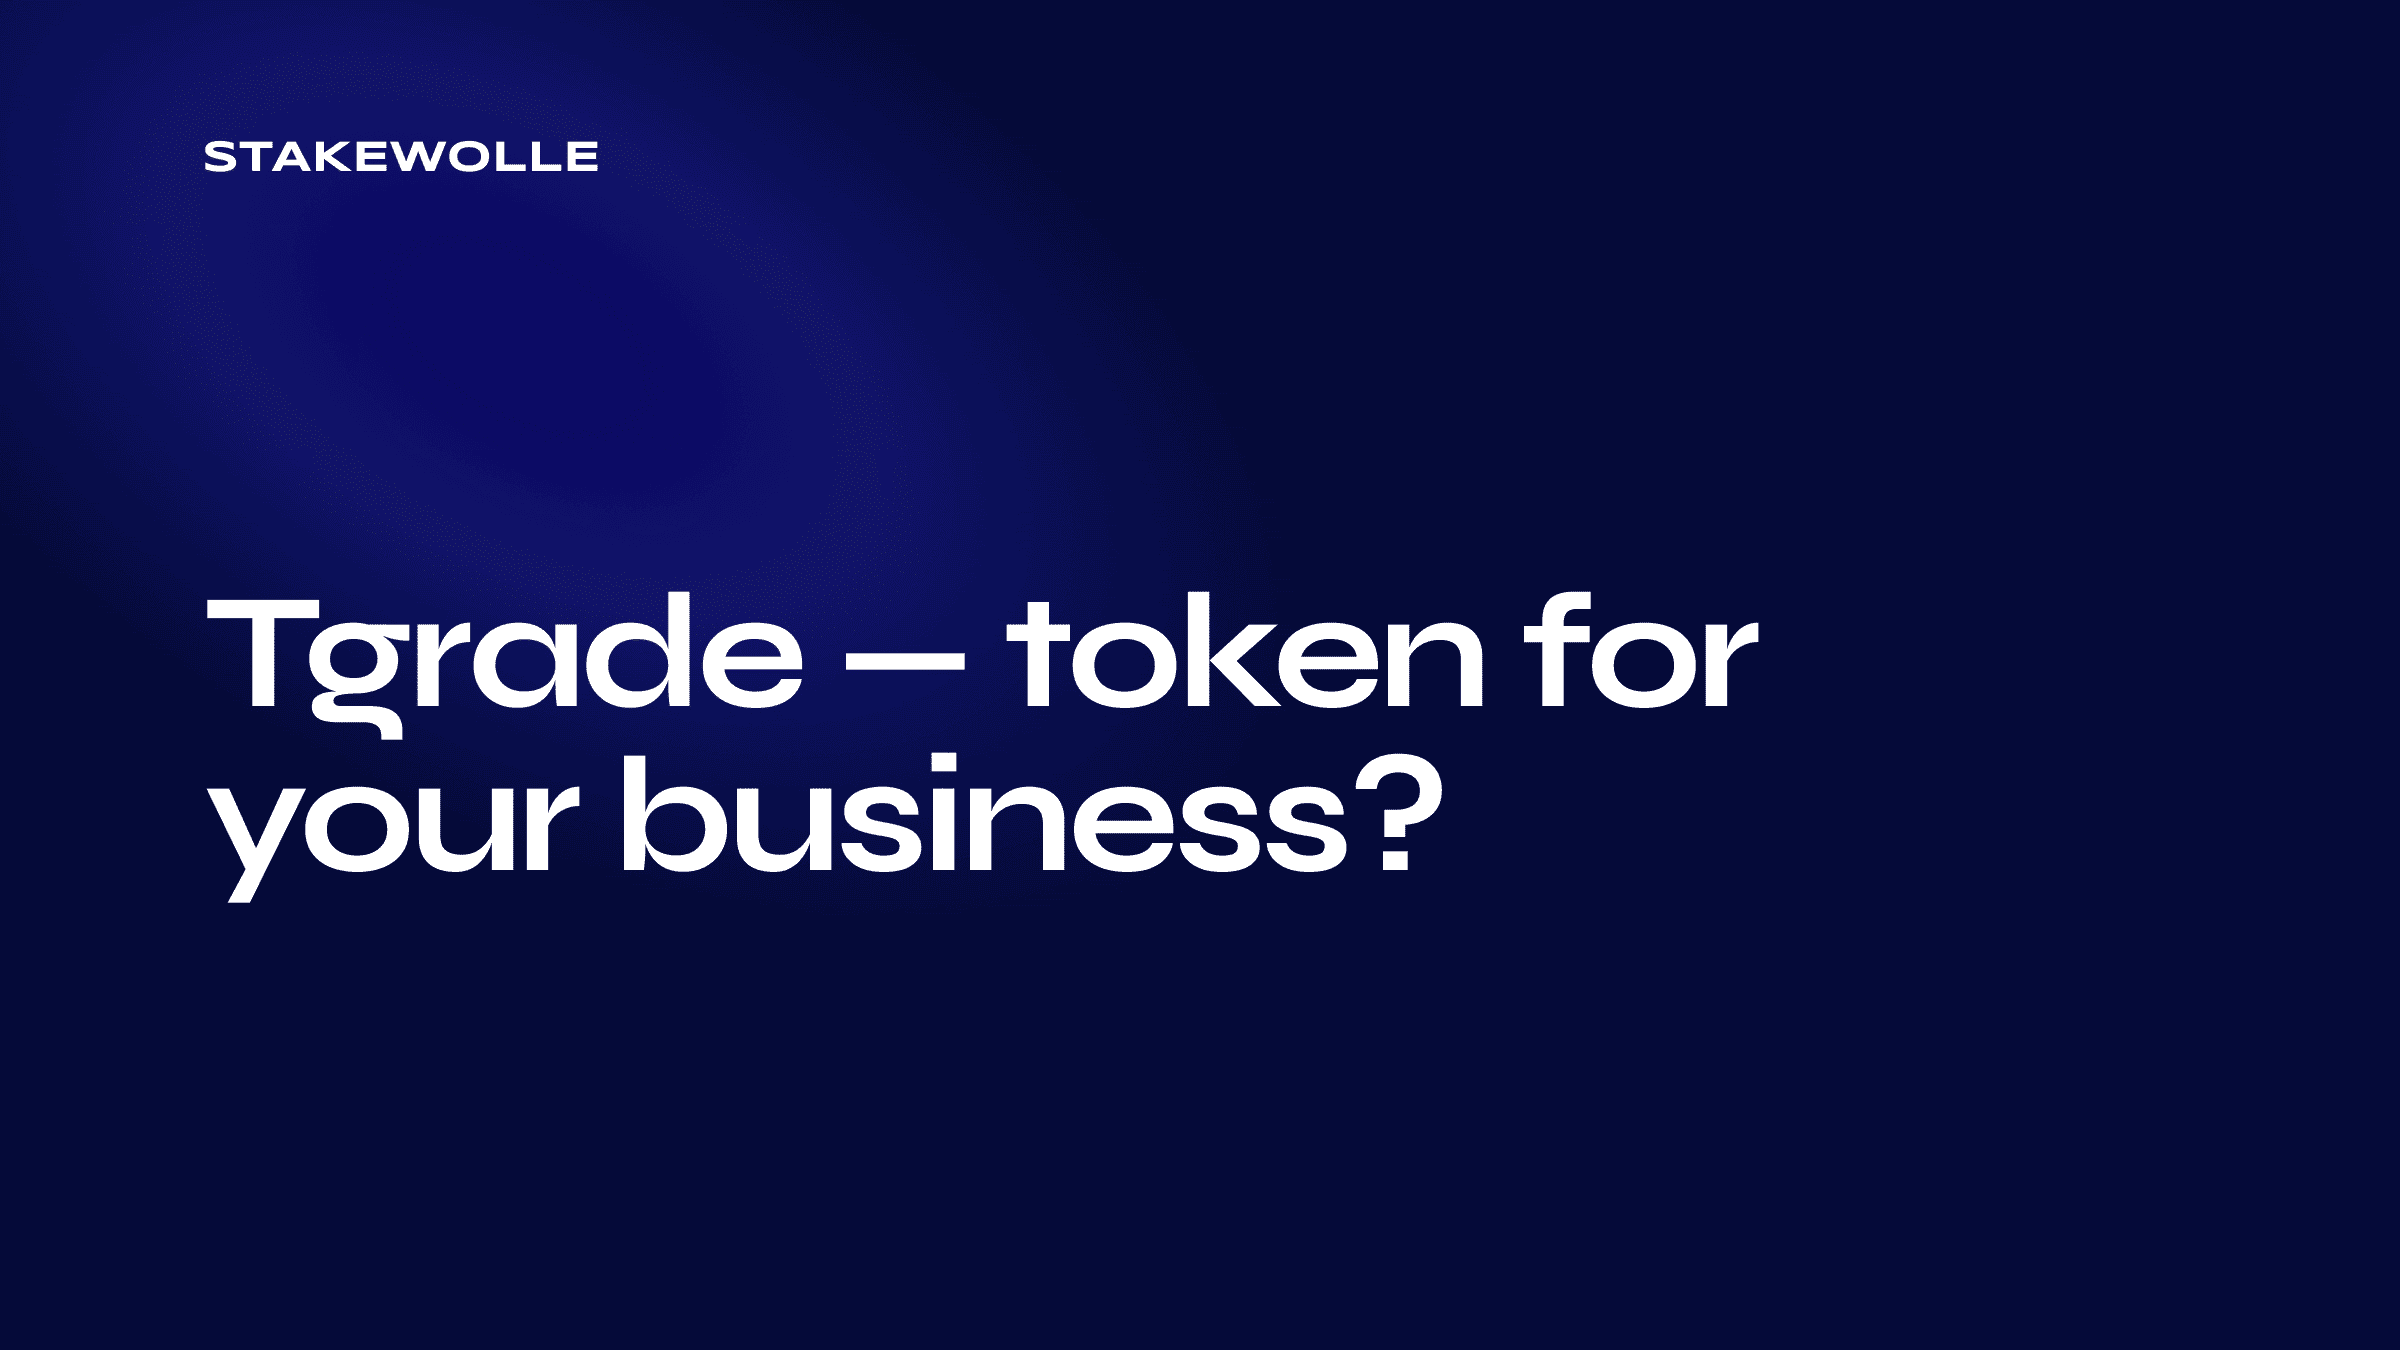 Tgrade — token for your business?